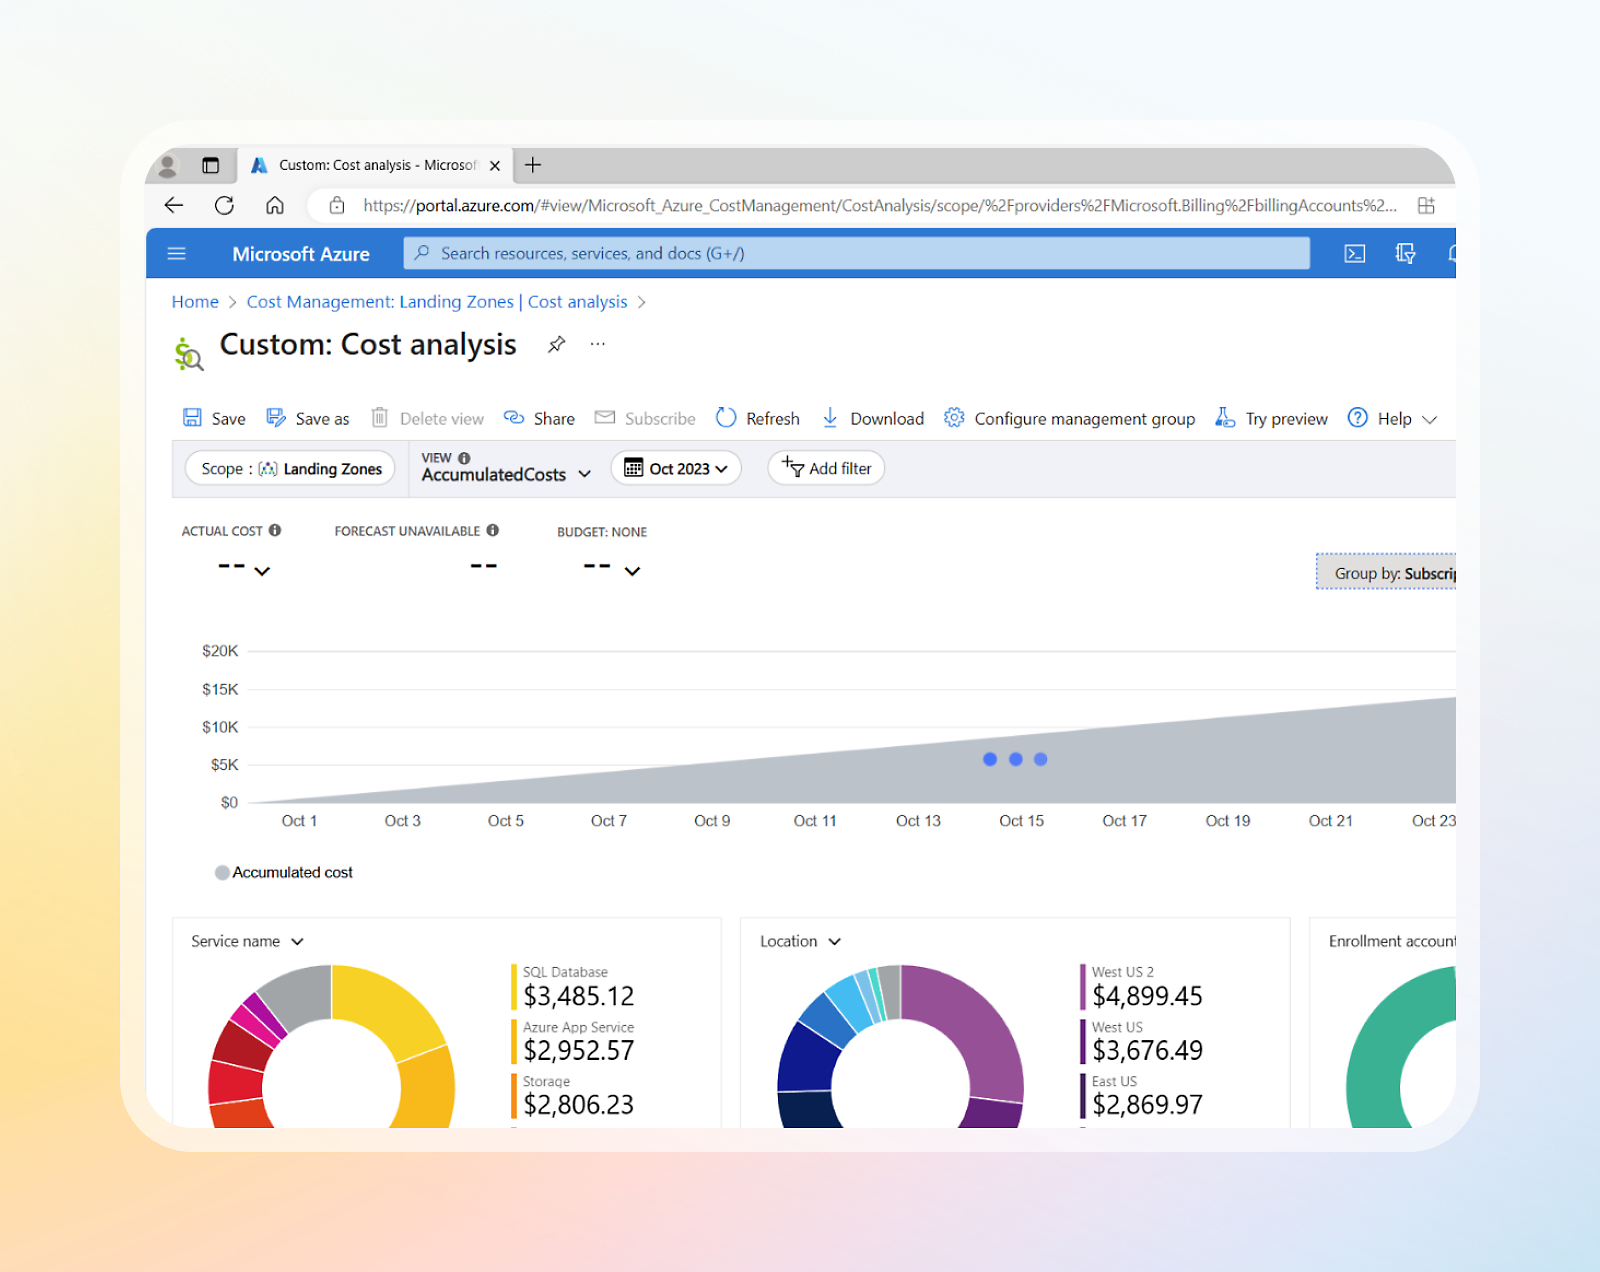 A screenshot of a Microsoft Azure Cost Analysis dashboard showing various charts, graphs, and tabs for analyzing expenditures